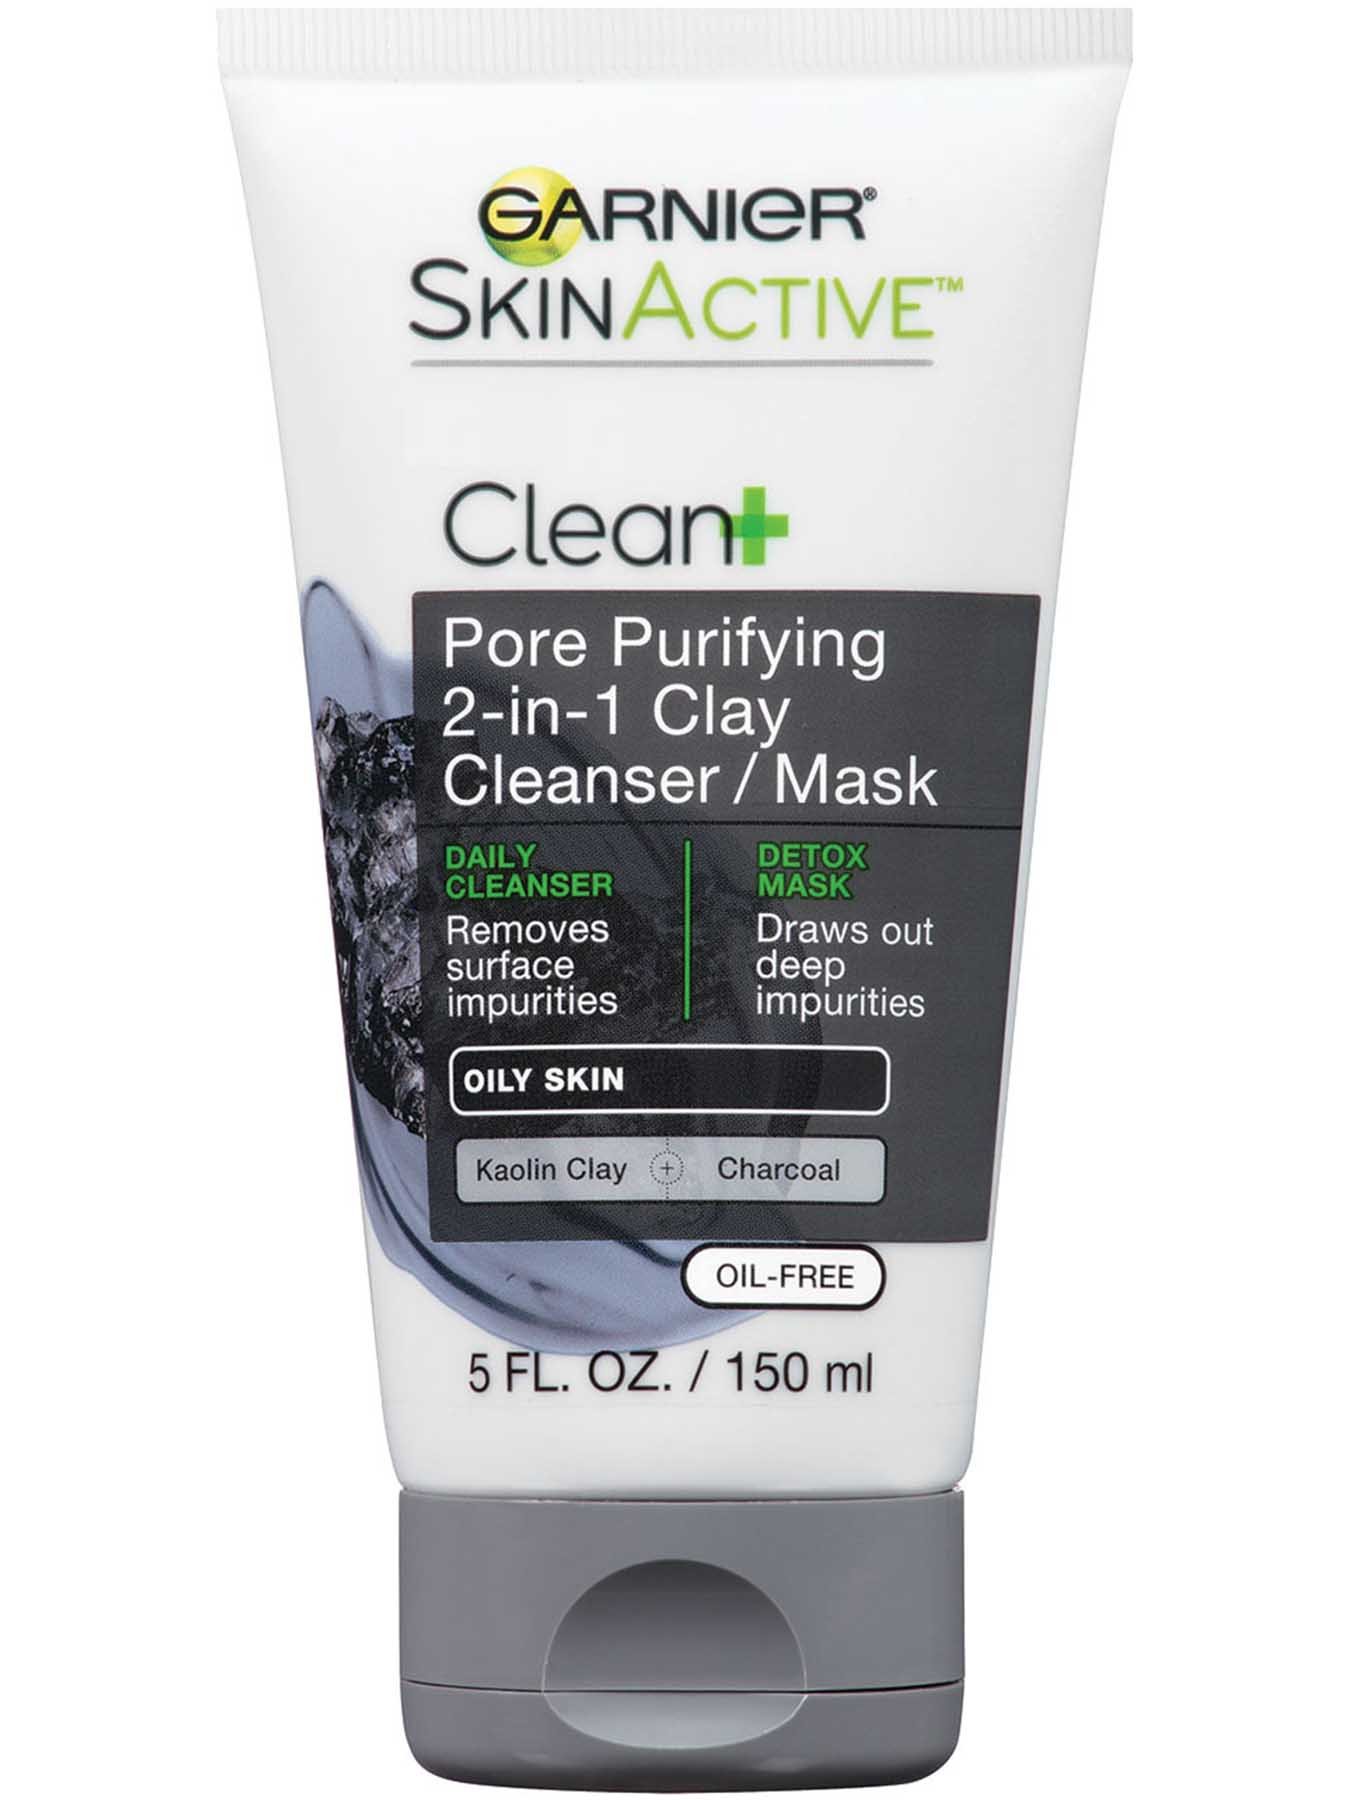 Front view of Clean+ Pore Purifying 2-in-1 Clay Cleanser/Mask, Oily Skin, Oil-Free.